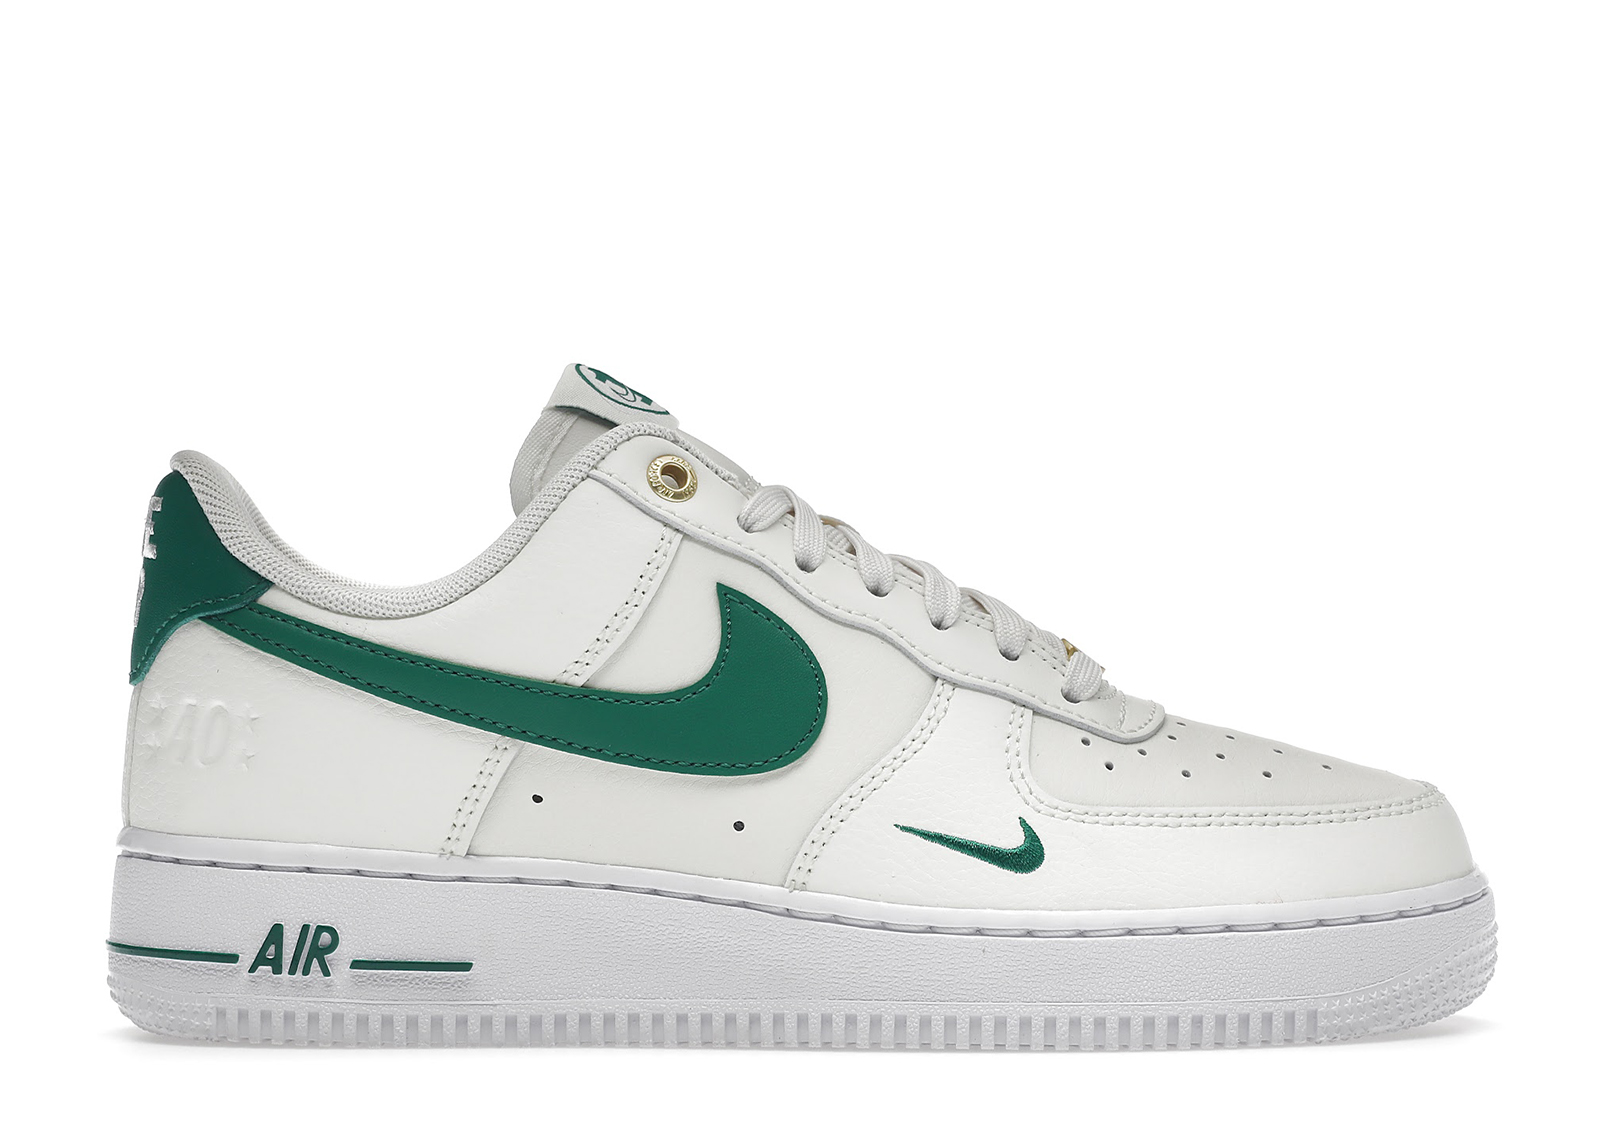 Nike Air Force 1 Low '07 SE 40th Anniversary Edition Sail 